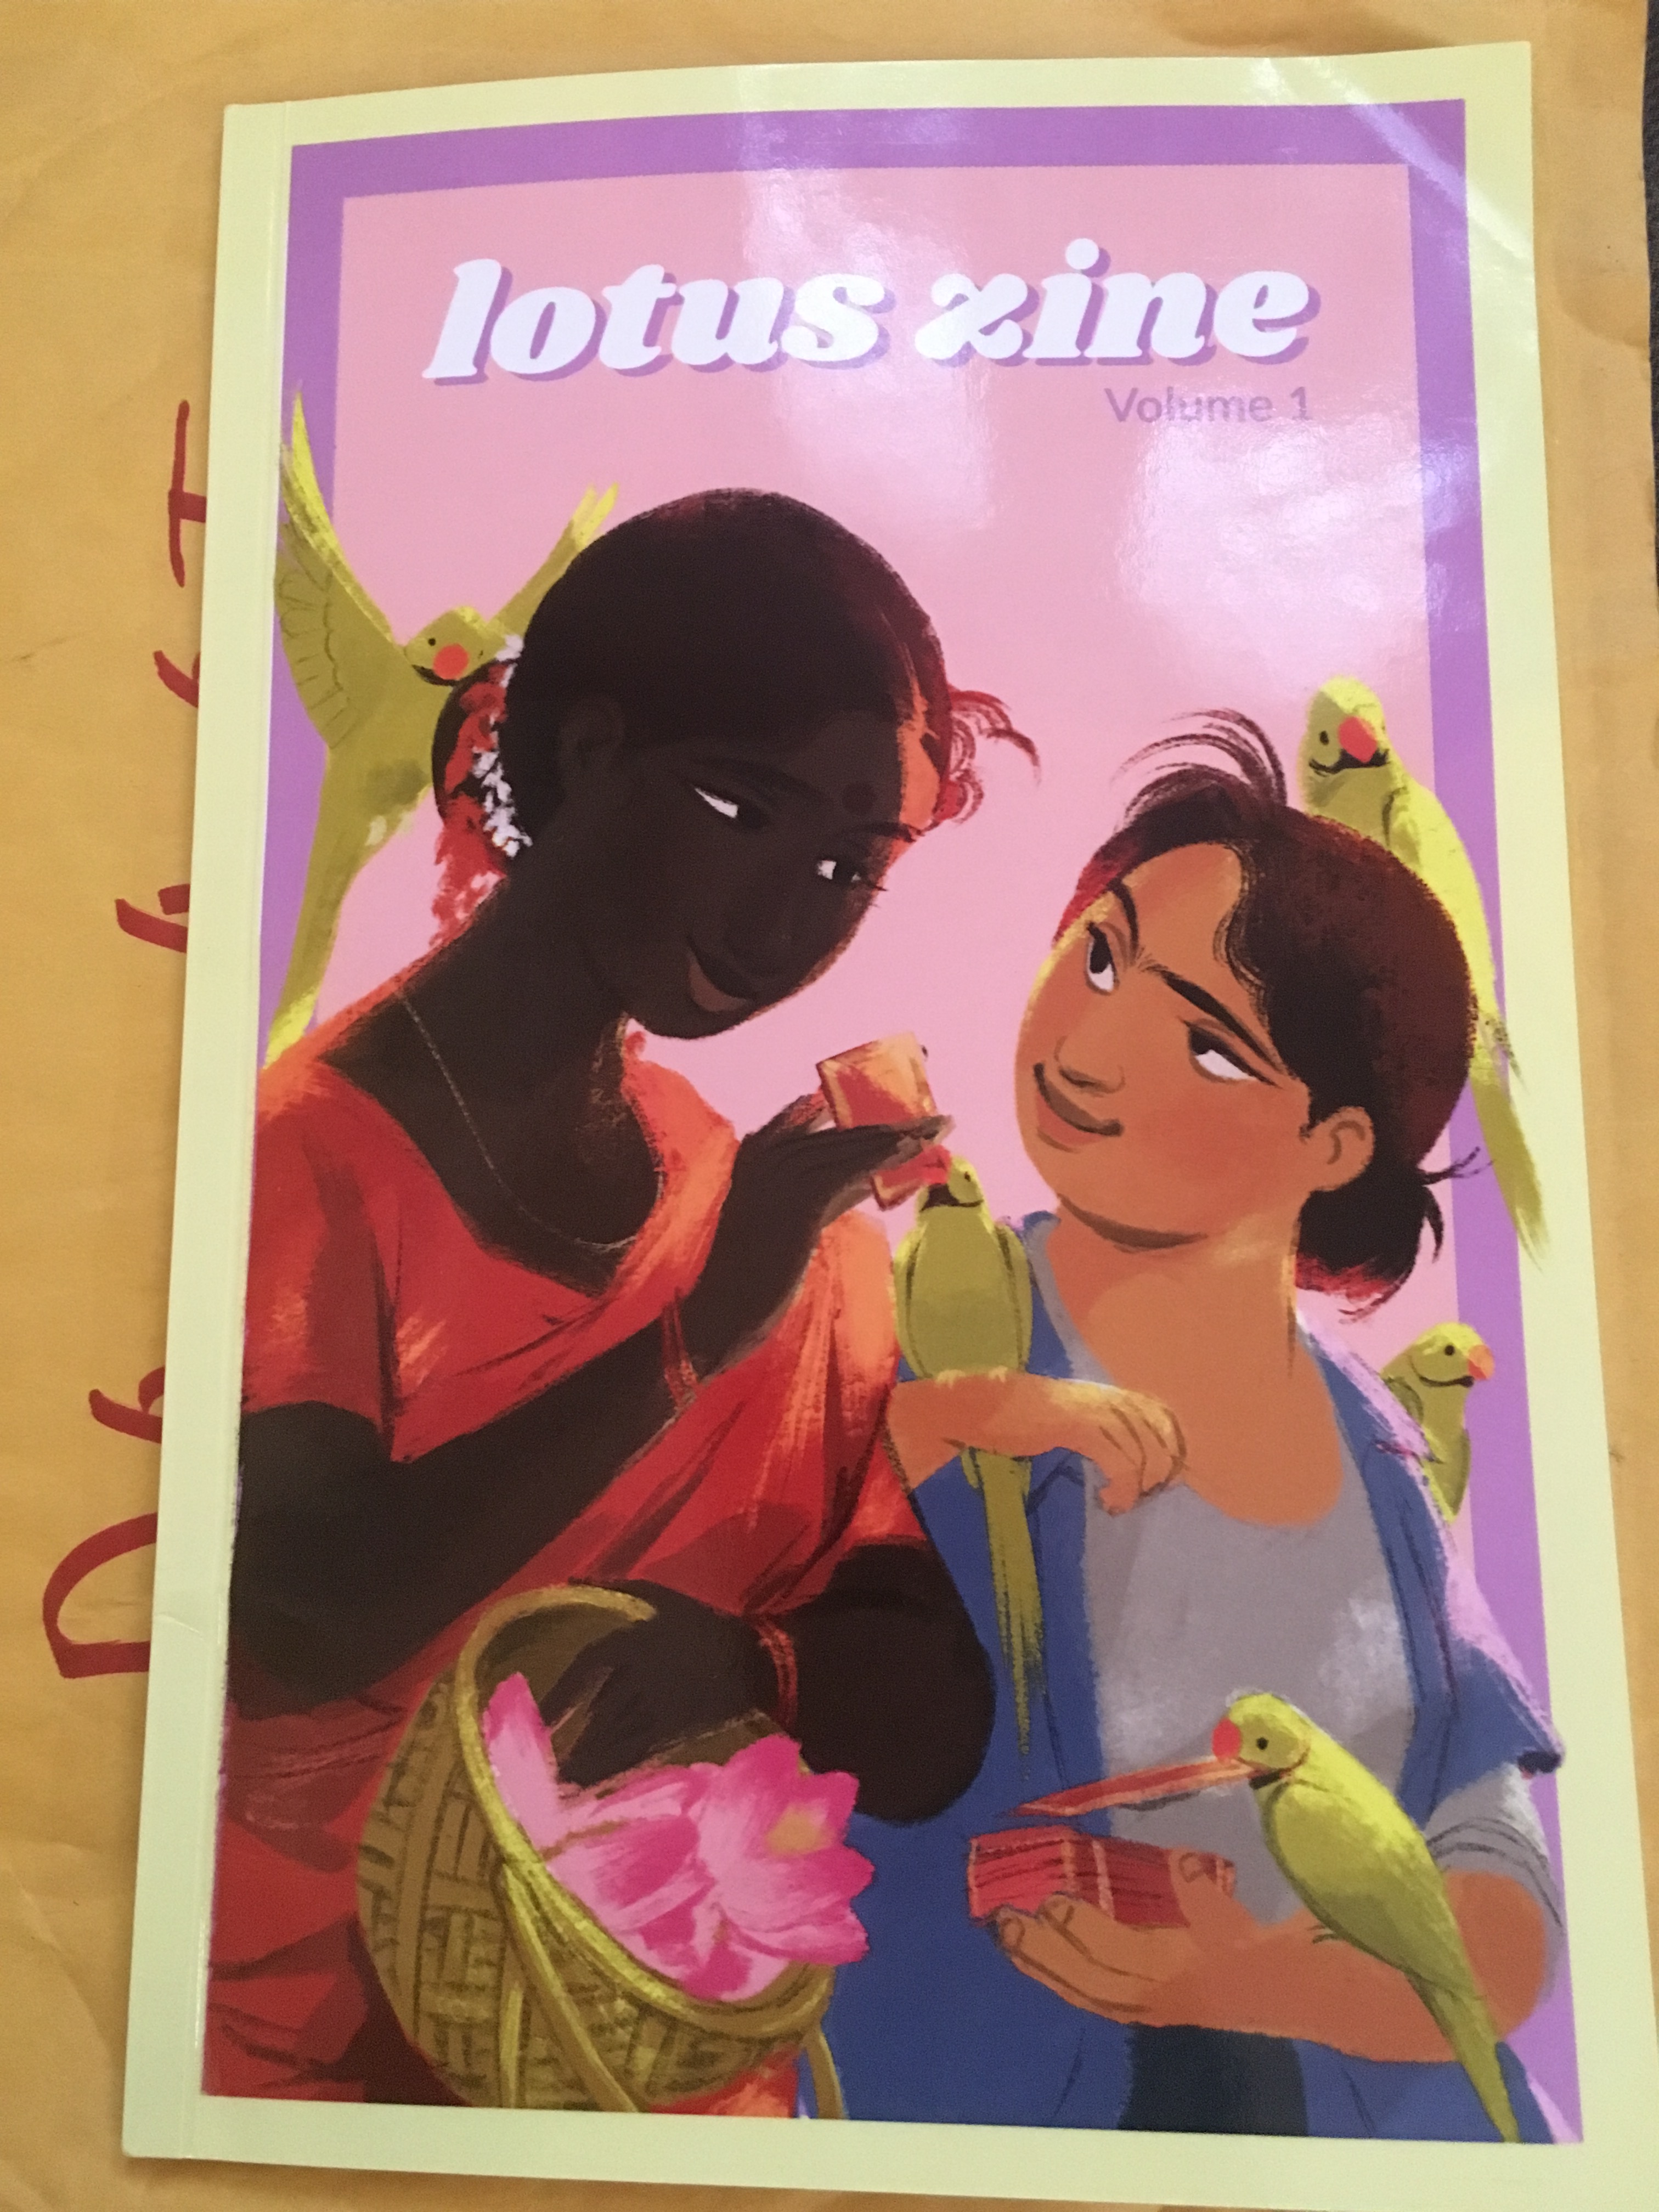 Lotus Zine Vol 1 : Anthology of South Asian LGBT+ art and literature